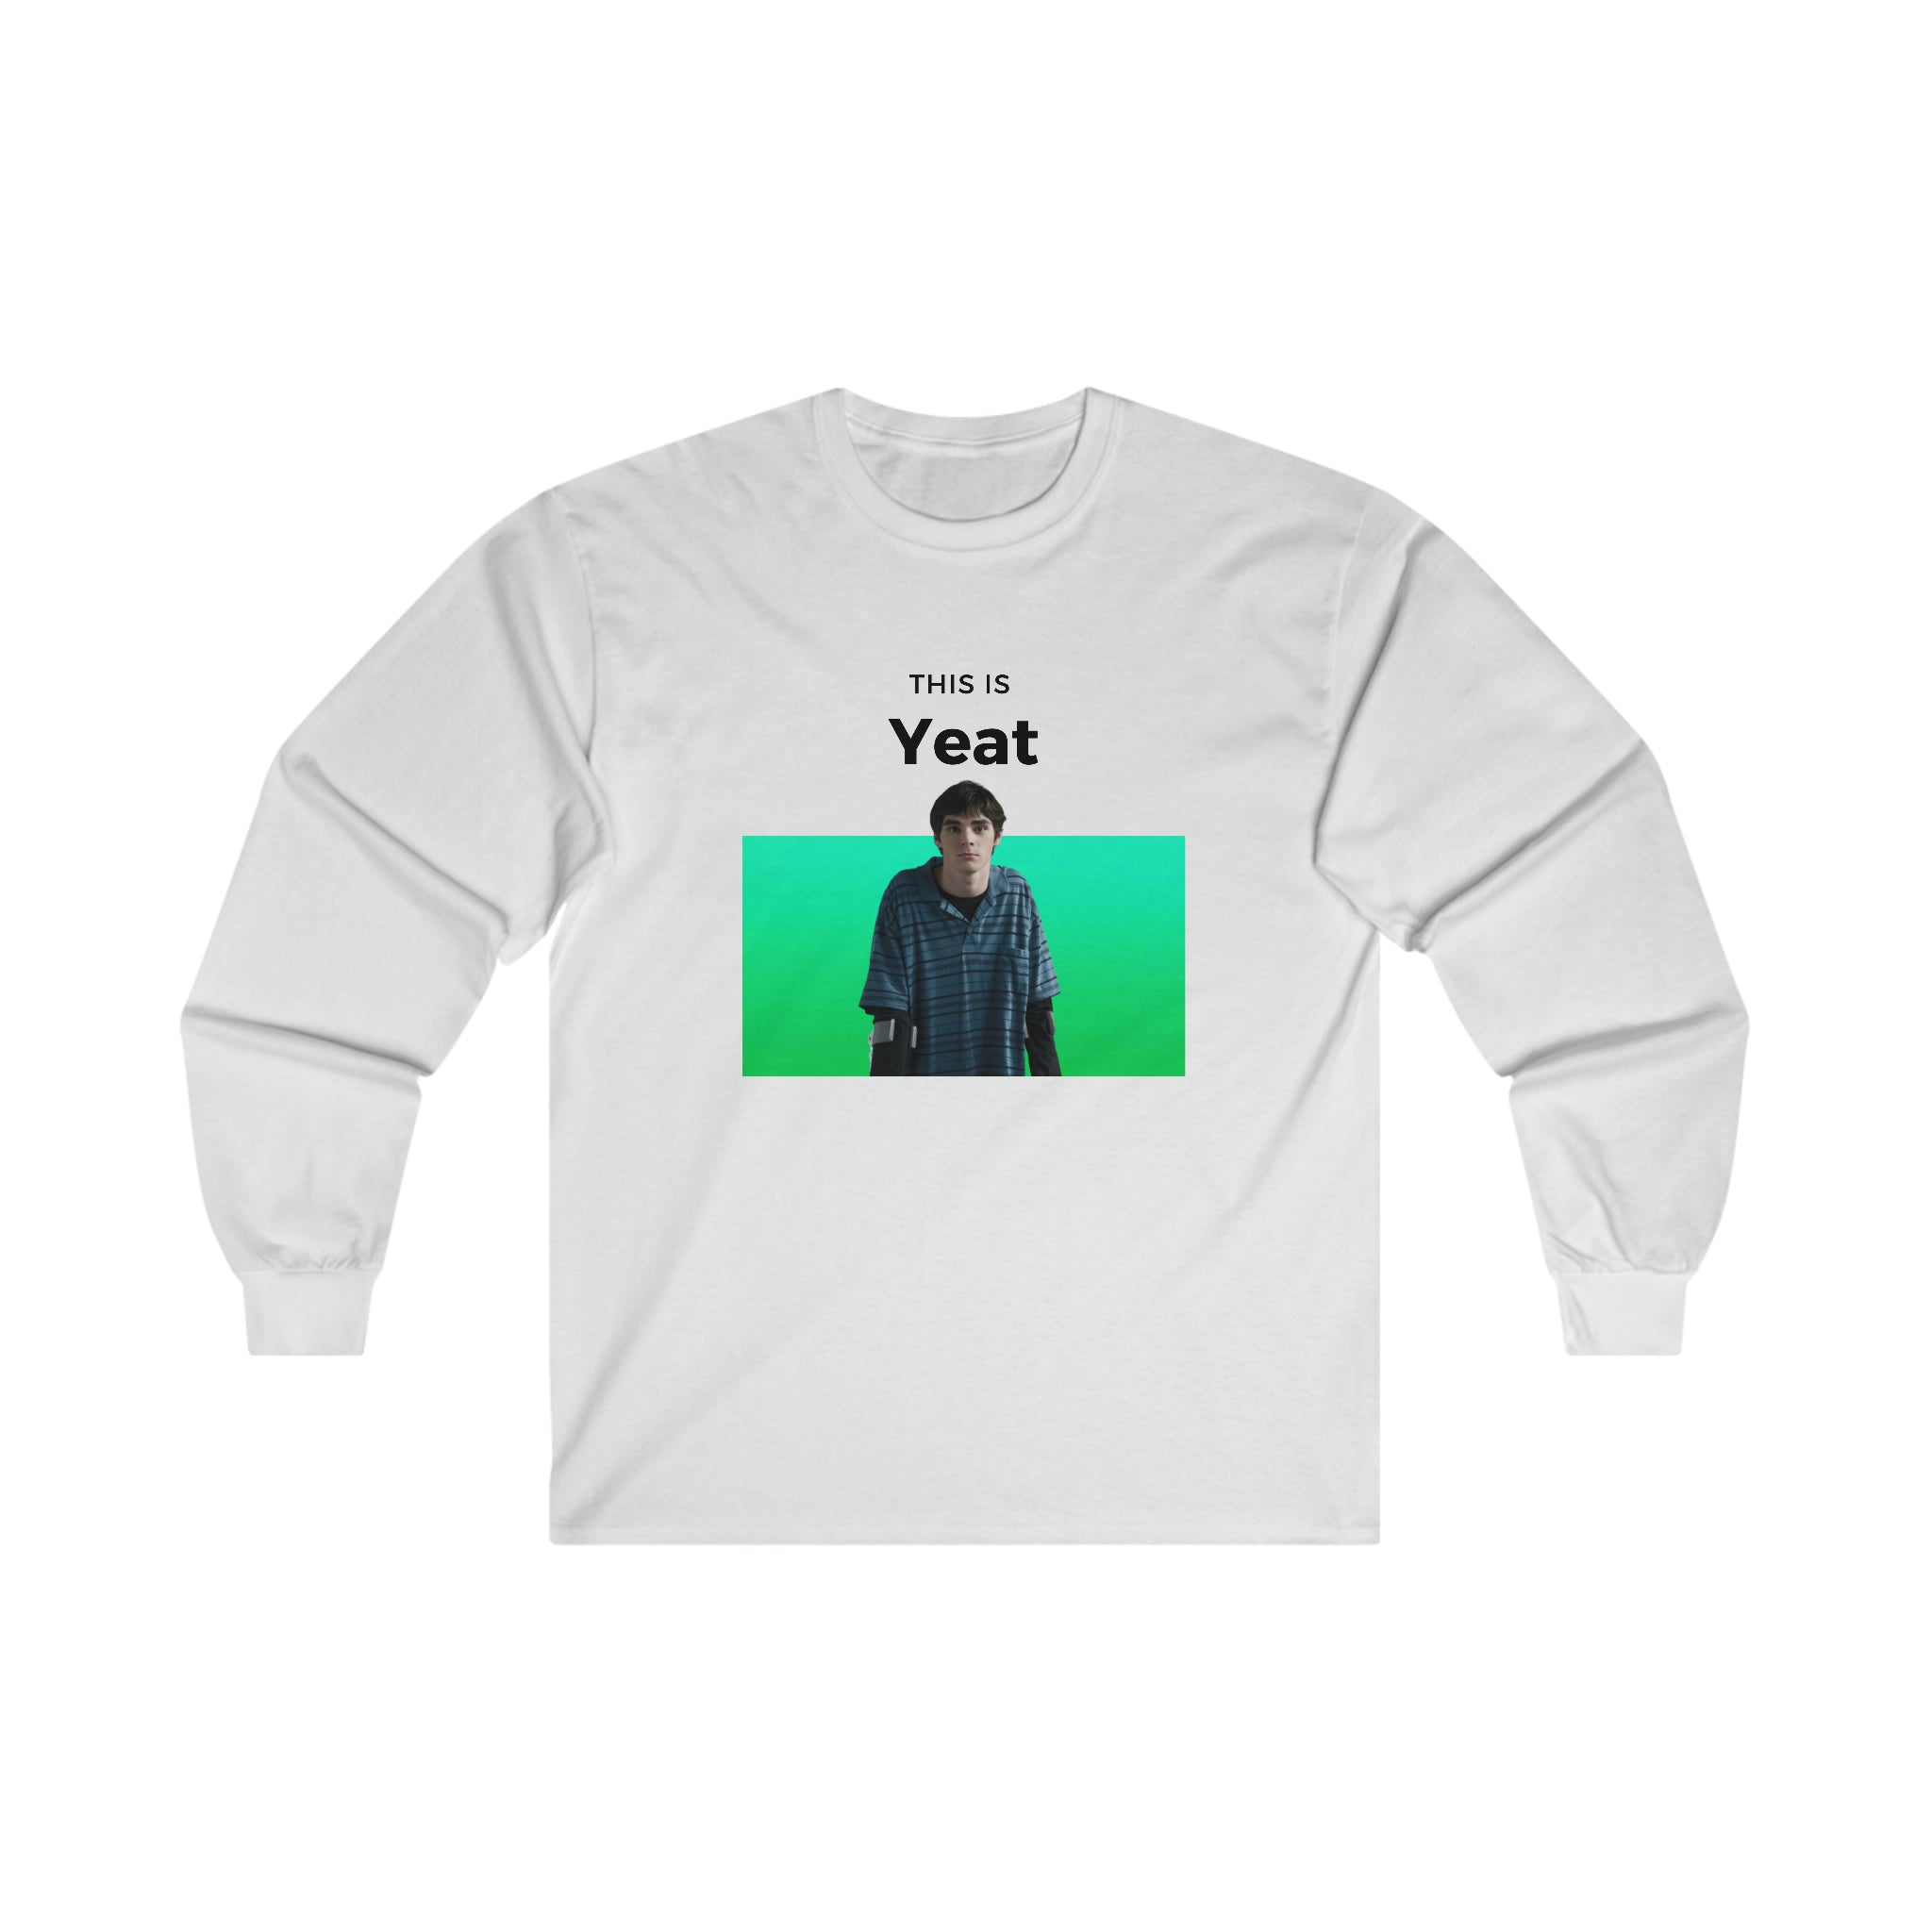 This is Yeat Walt Jr - Ultra Cotton Long Sleeve Tee - All Colors